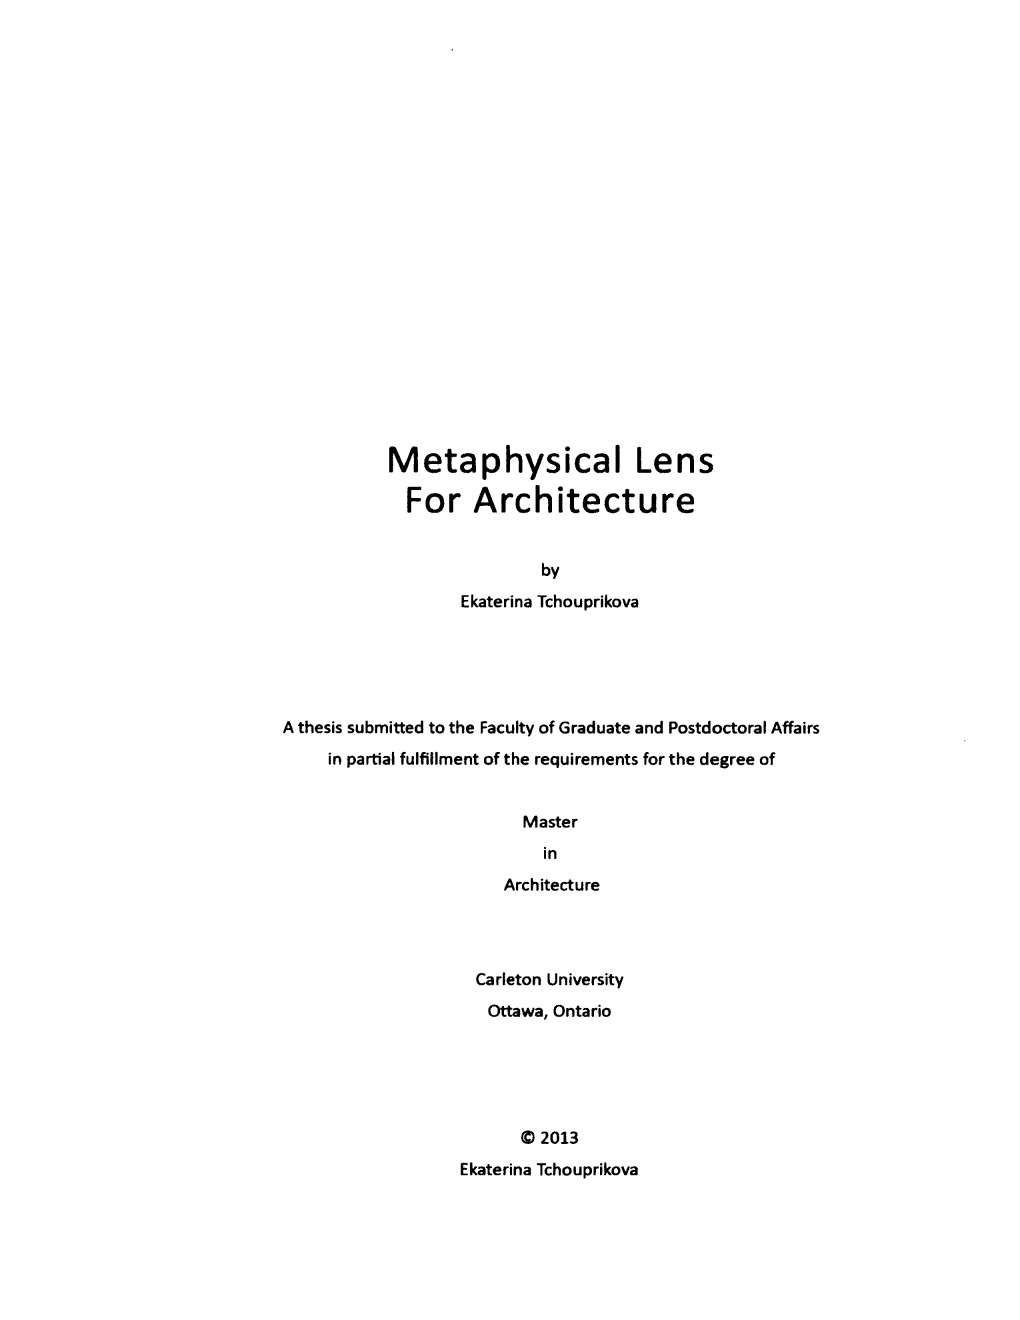 Metaphysical Lens for Architecture